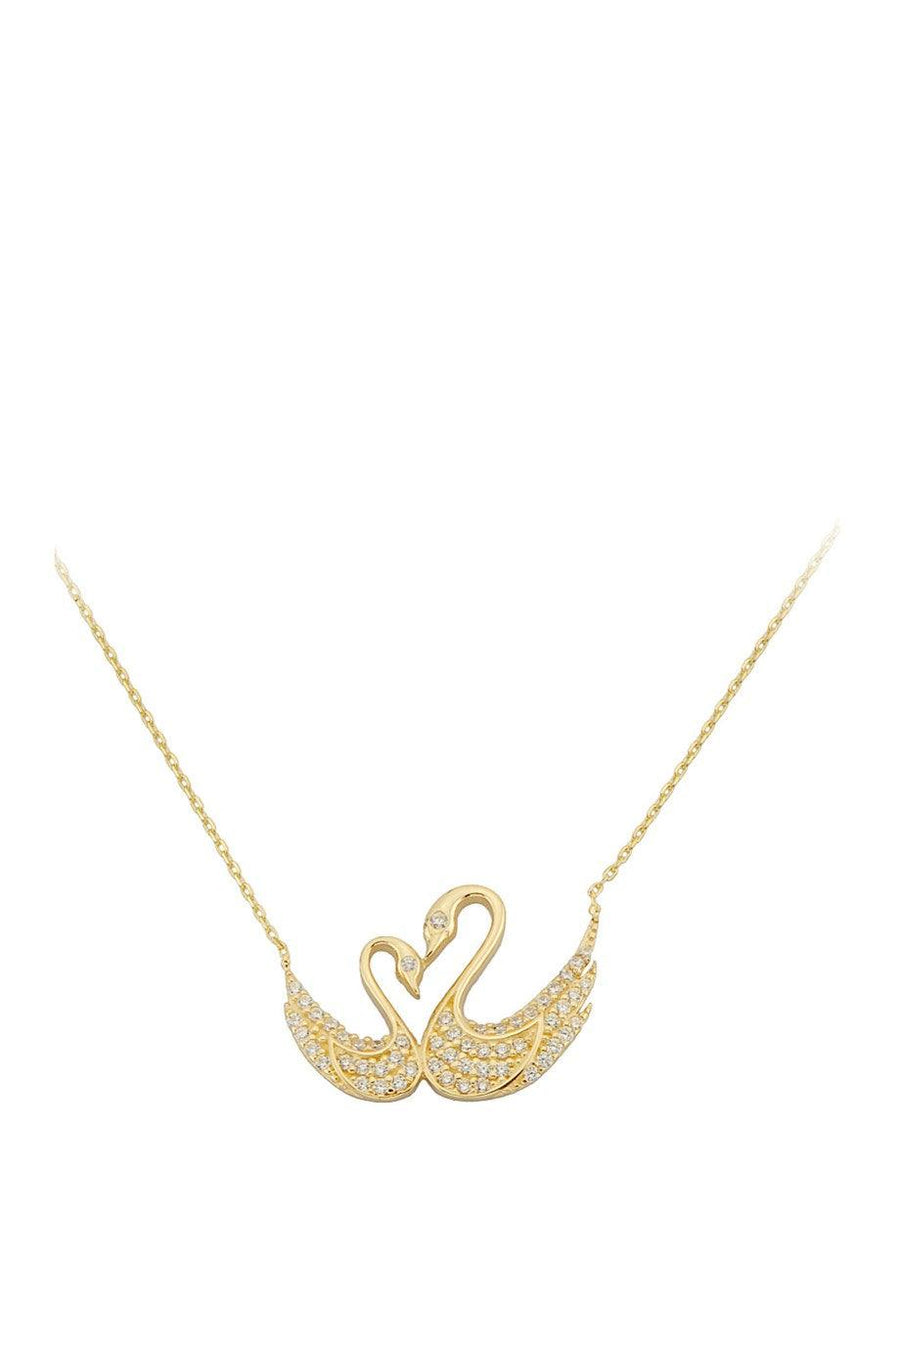 Gold Binary Swan Necklace